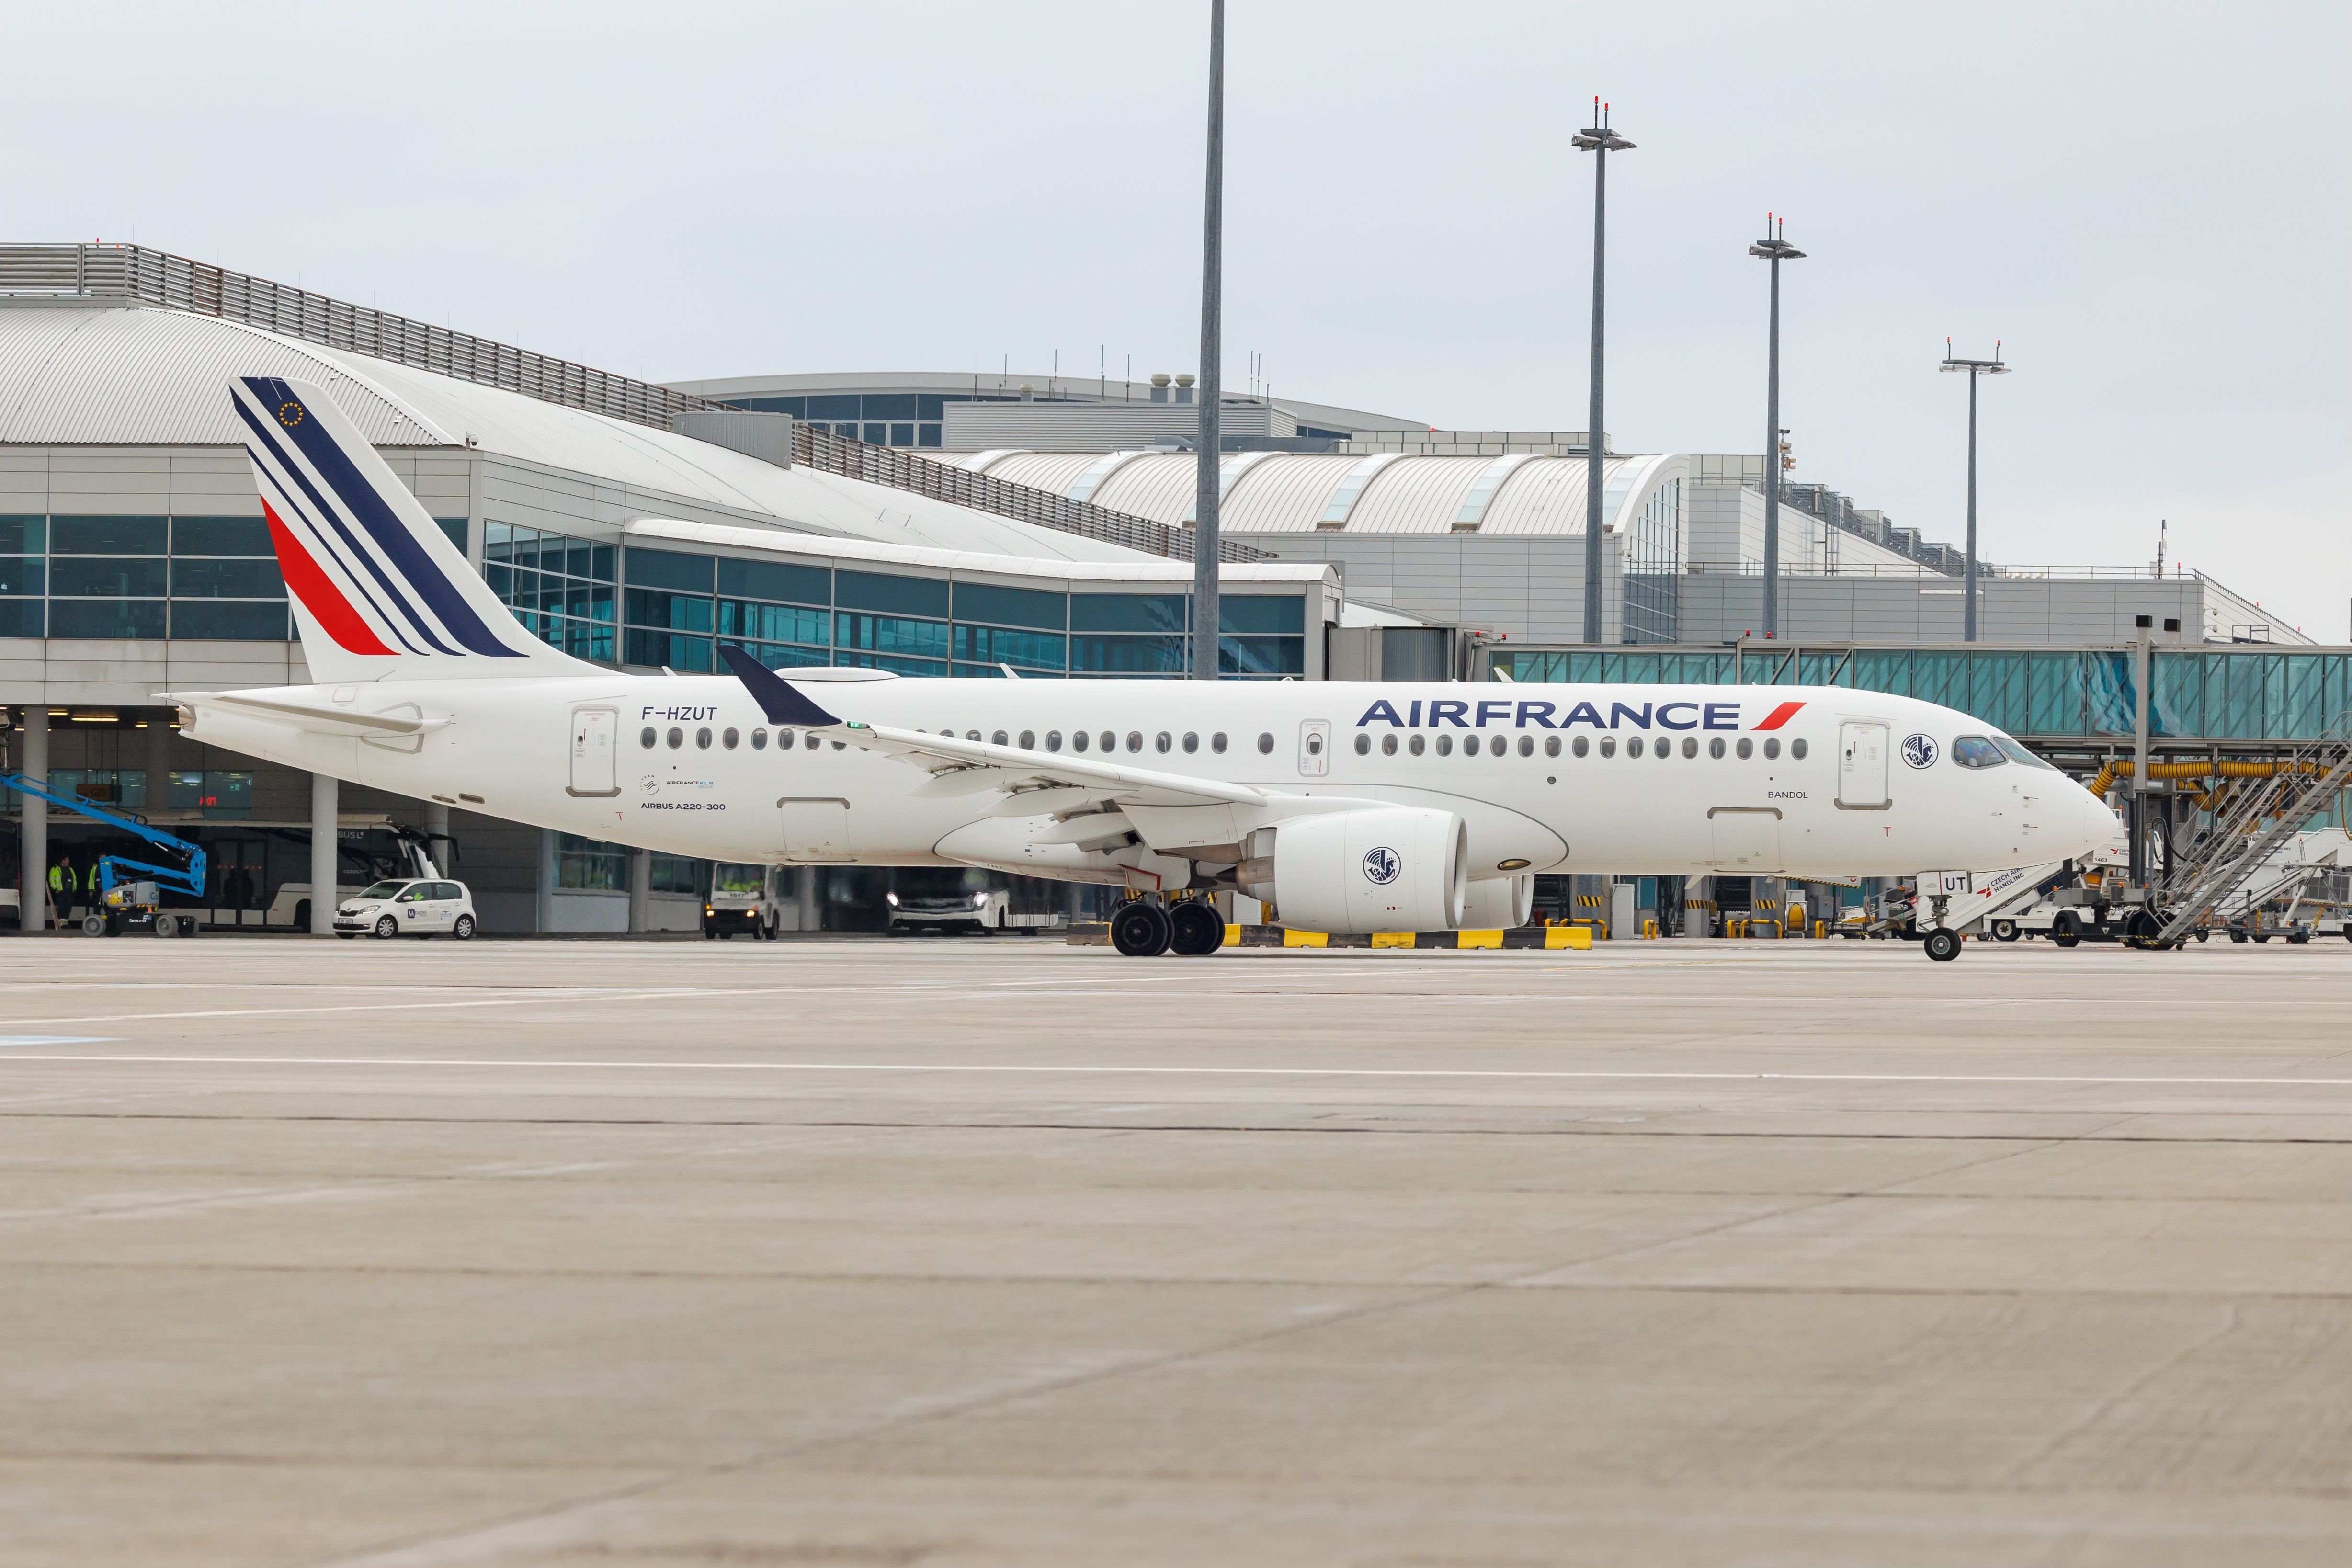 Air France A220 taxiing